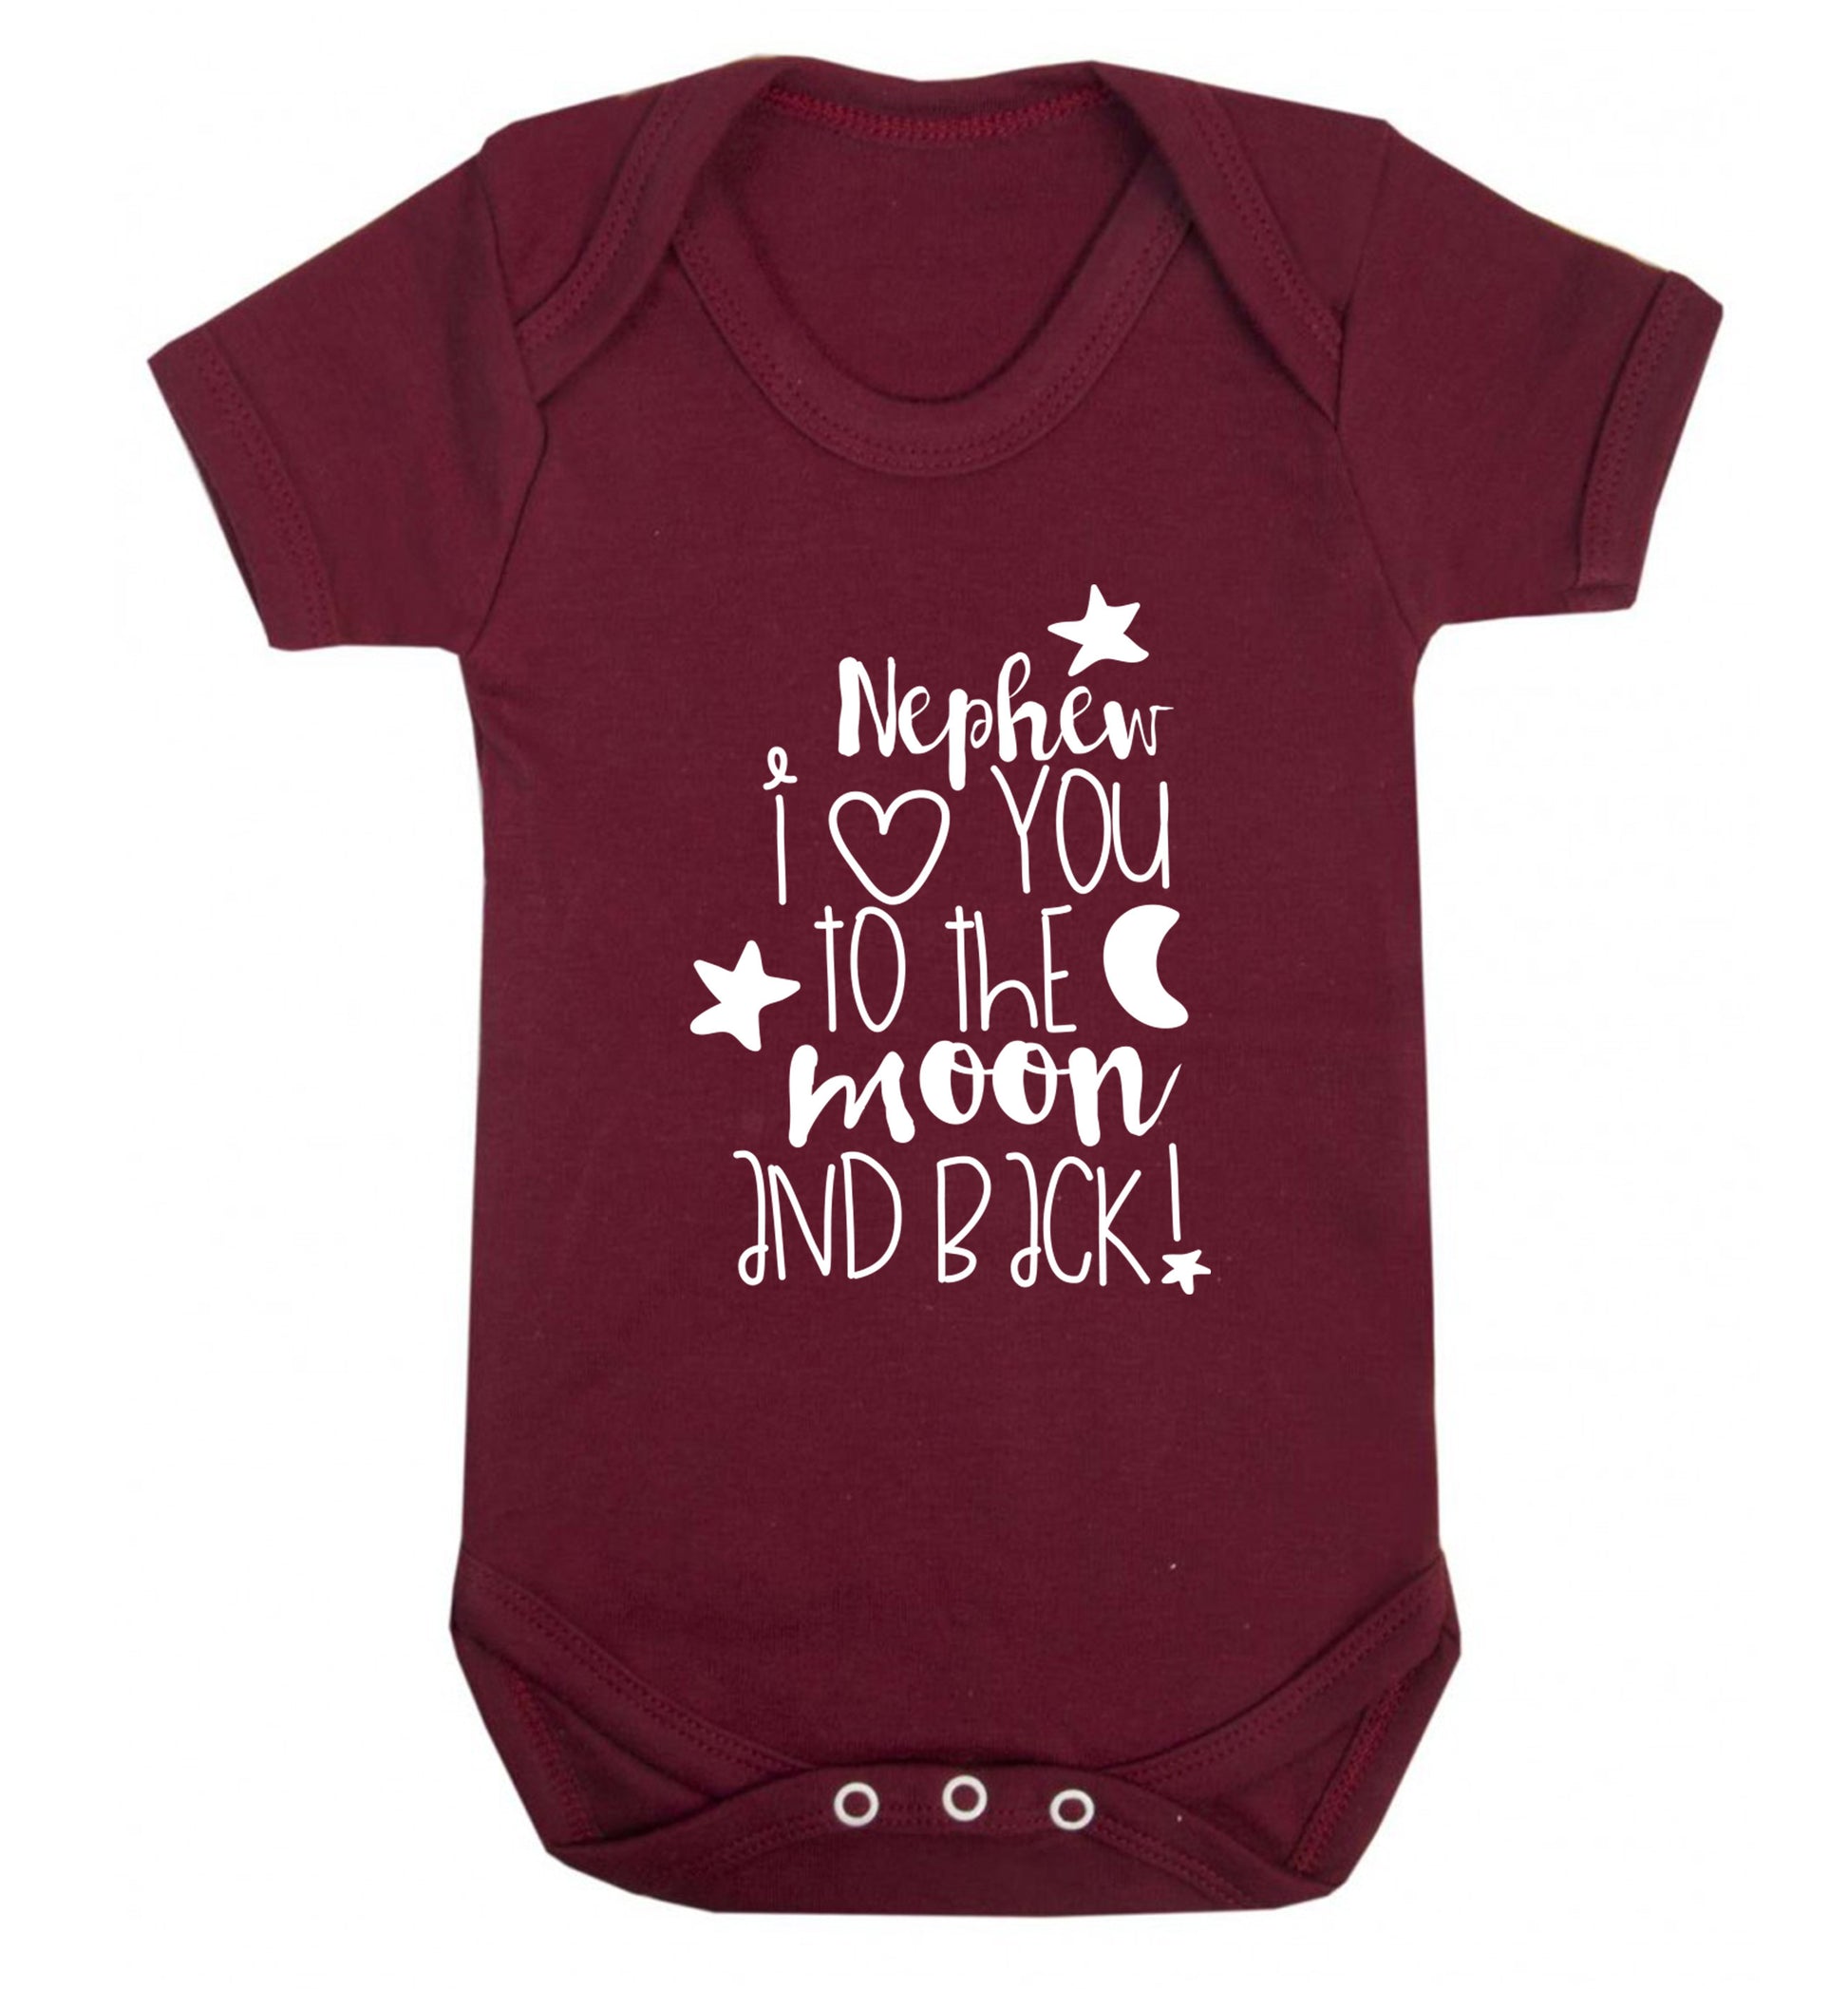 Nephew I love you to the moon and back Baby Vest maroon 18-24 months